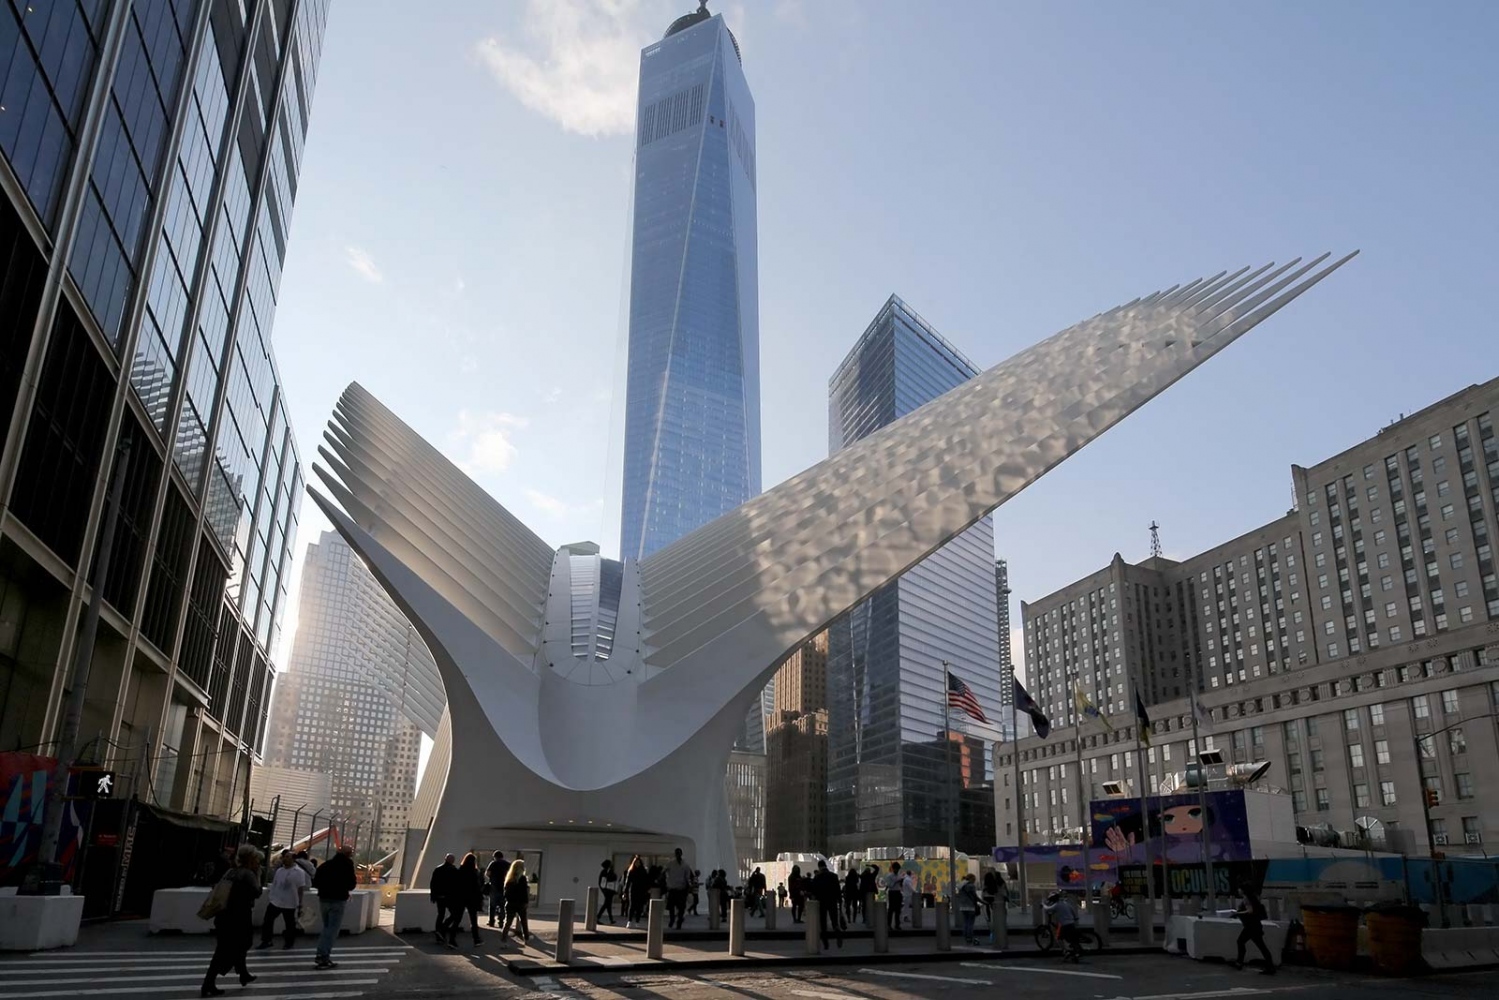 Image from Architecture - Oculus - World Trade Center - New York